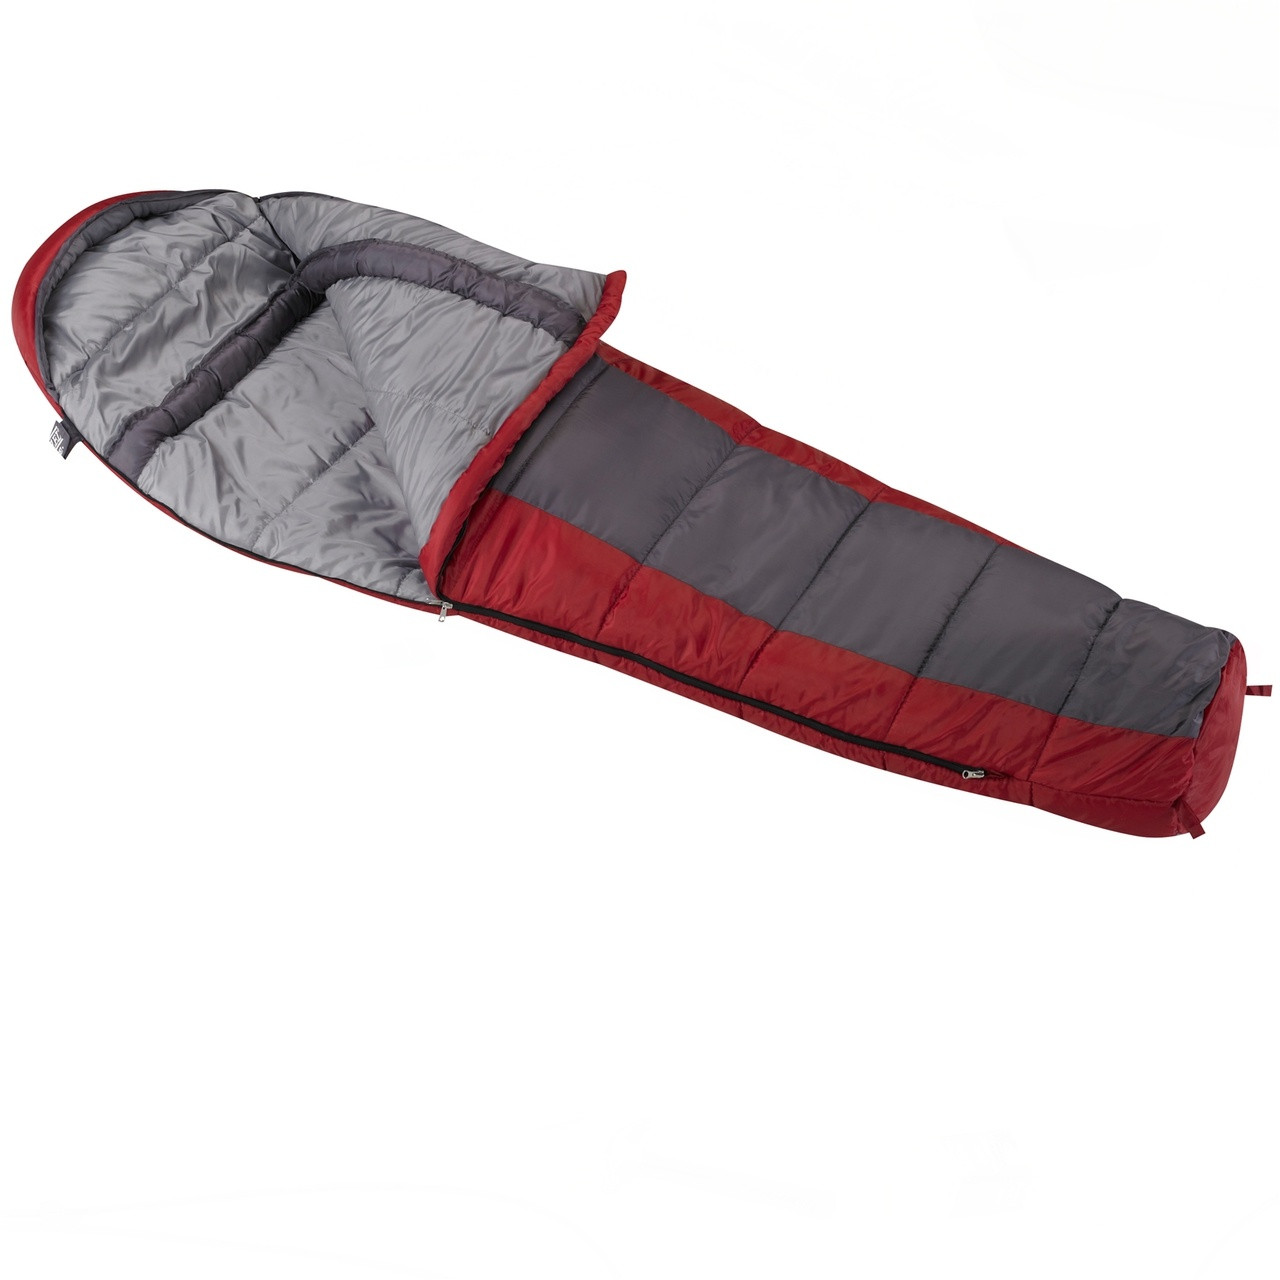 Wenzel Windy Pass Mummy 0 degree sleeping bag, blue and red, laying flat with the corner partially unzipped and folded over showing the gray interior of the sleeping bag